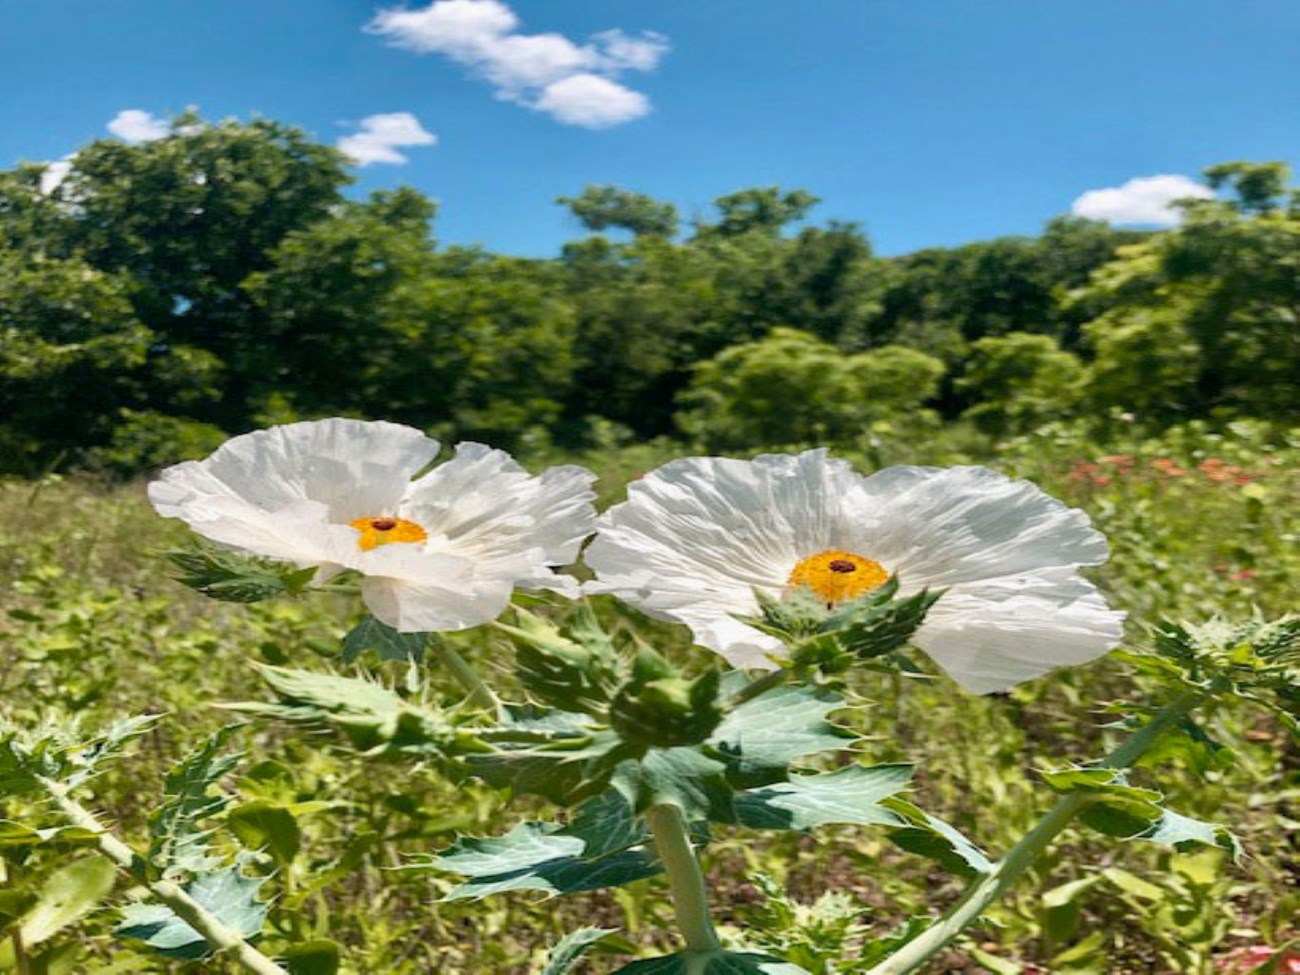 Two Prickly Poppies growing on the plains.